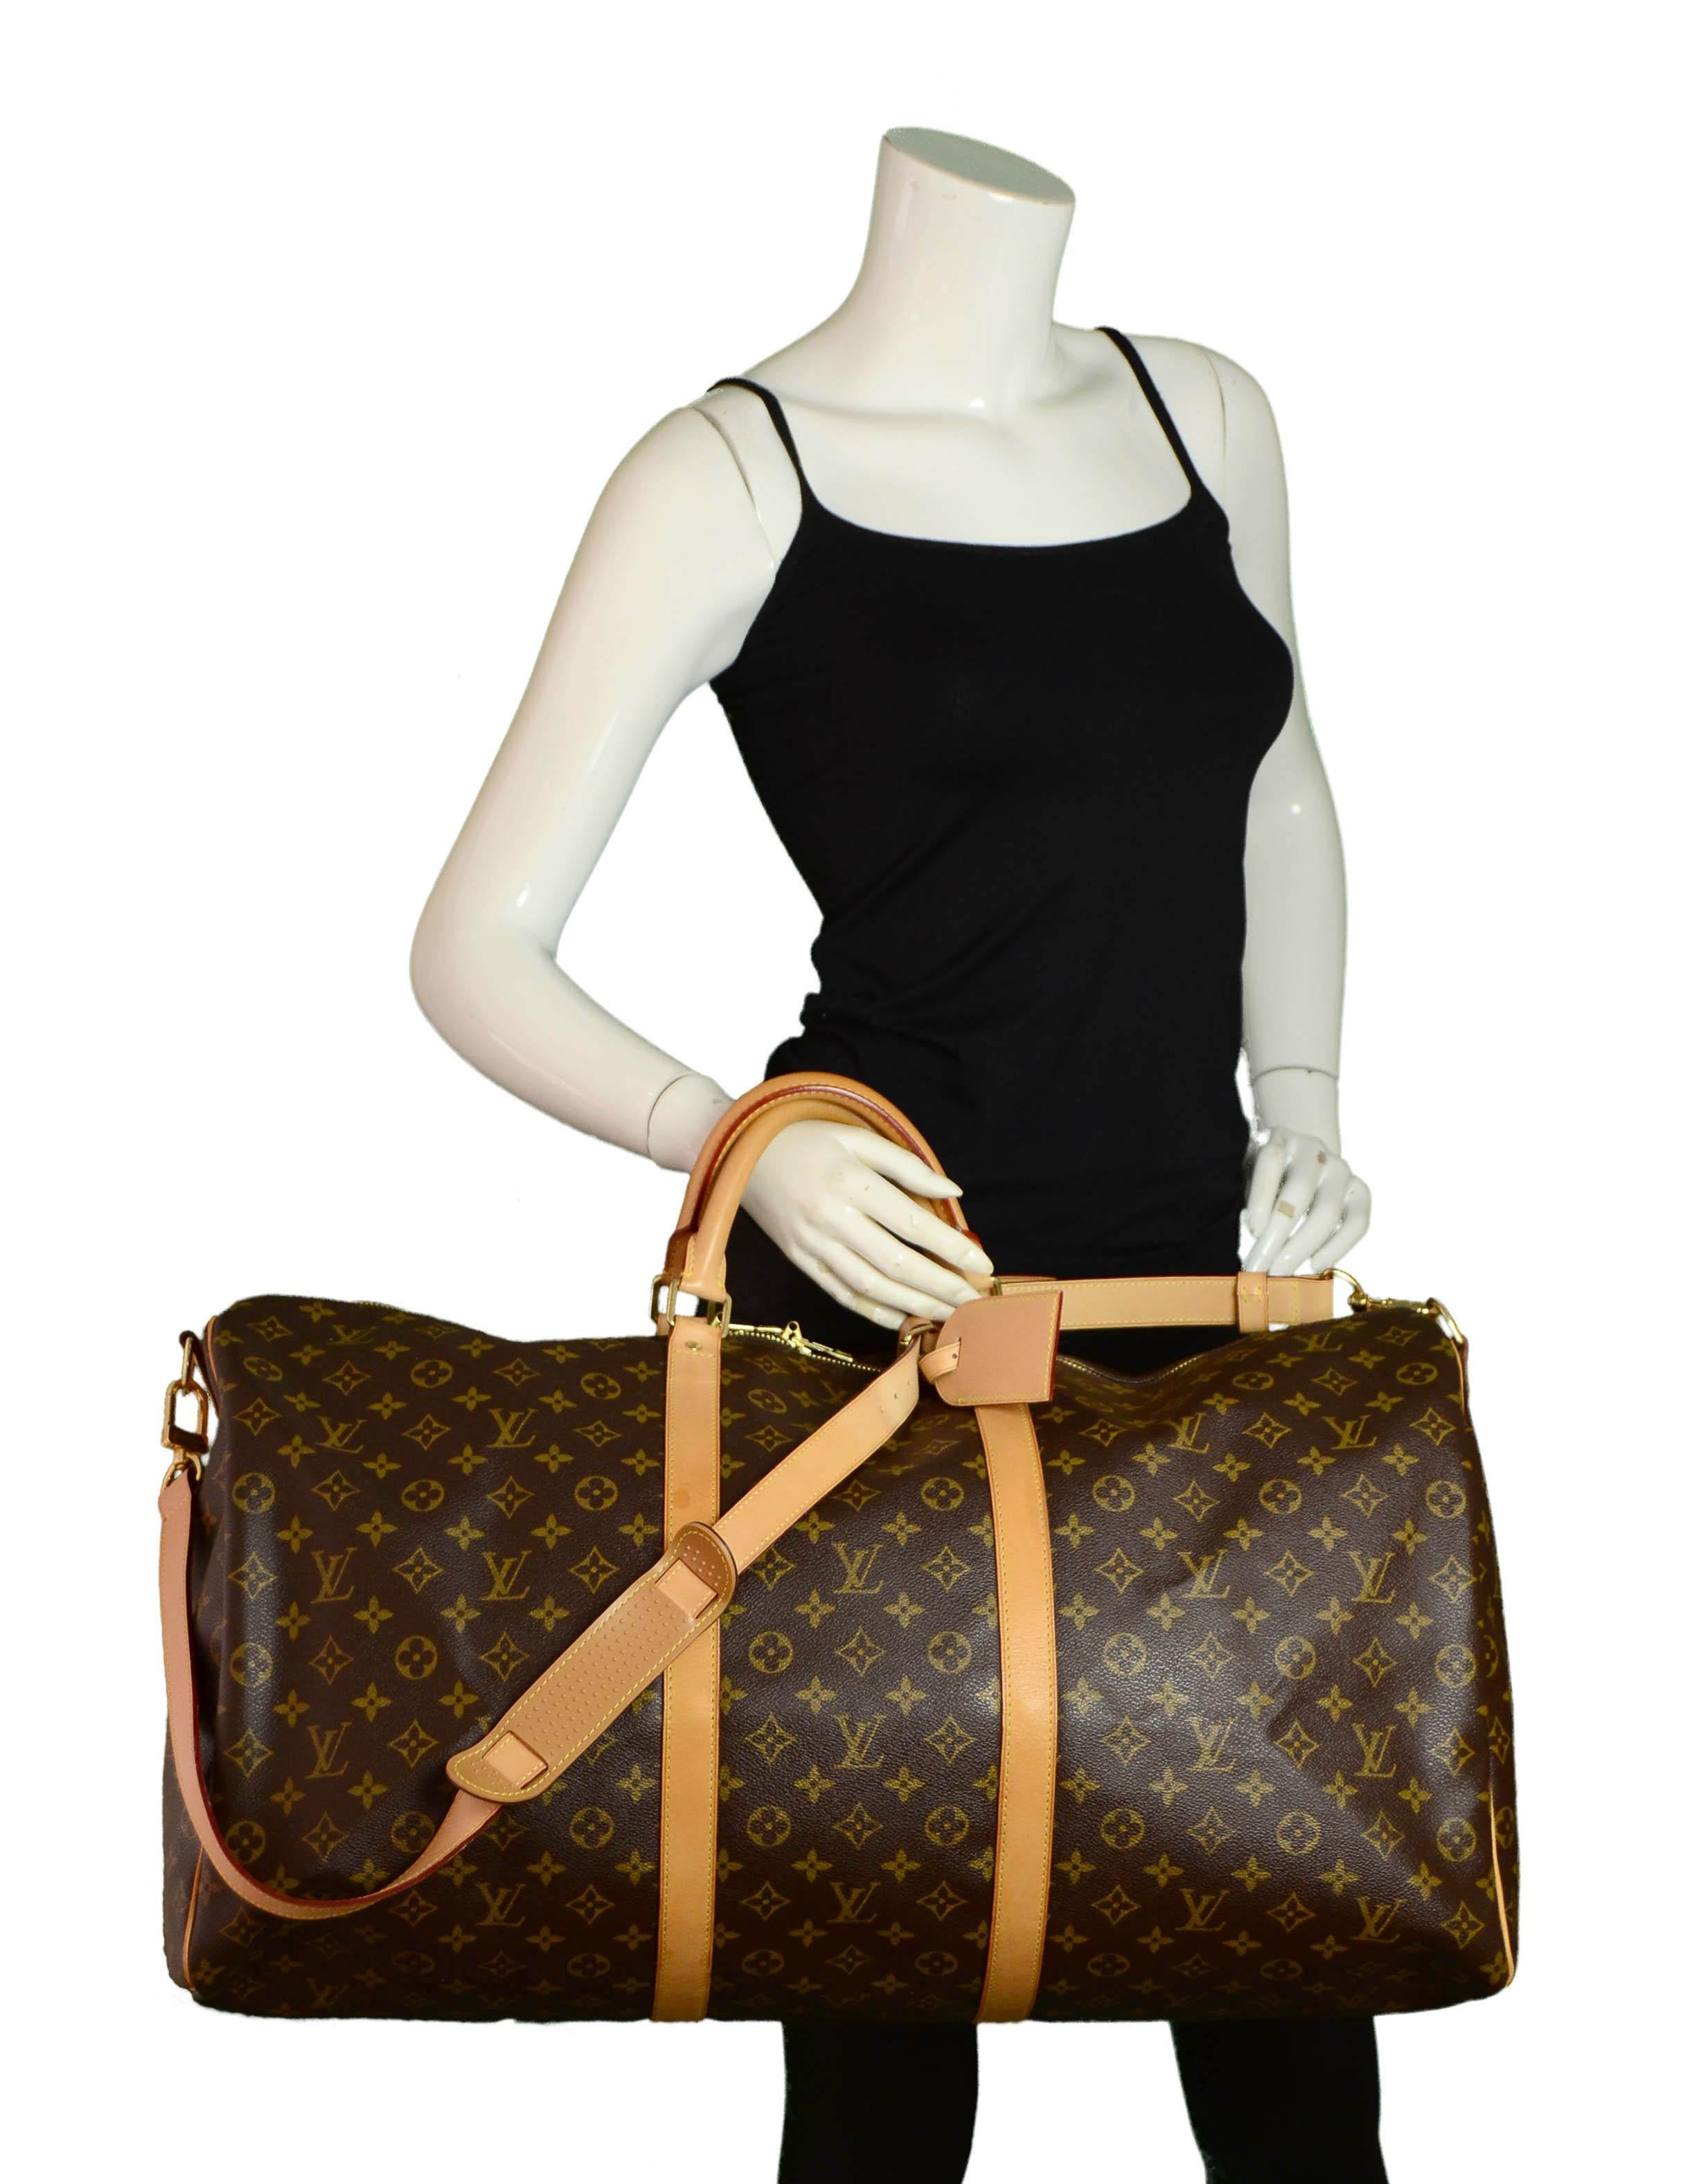 Louis Vuitton Monogram Keepall Bandouliere 60 Travel Duffle Bag

Made In: France
Year of Production: 2009
Color: Brown Monogram
Hardware: Goldtone
Materials: Coated canvas & vachetta leather
Lining: Canvas
Closure/Opening: Zip top
Exterior